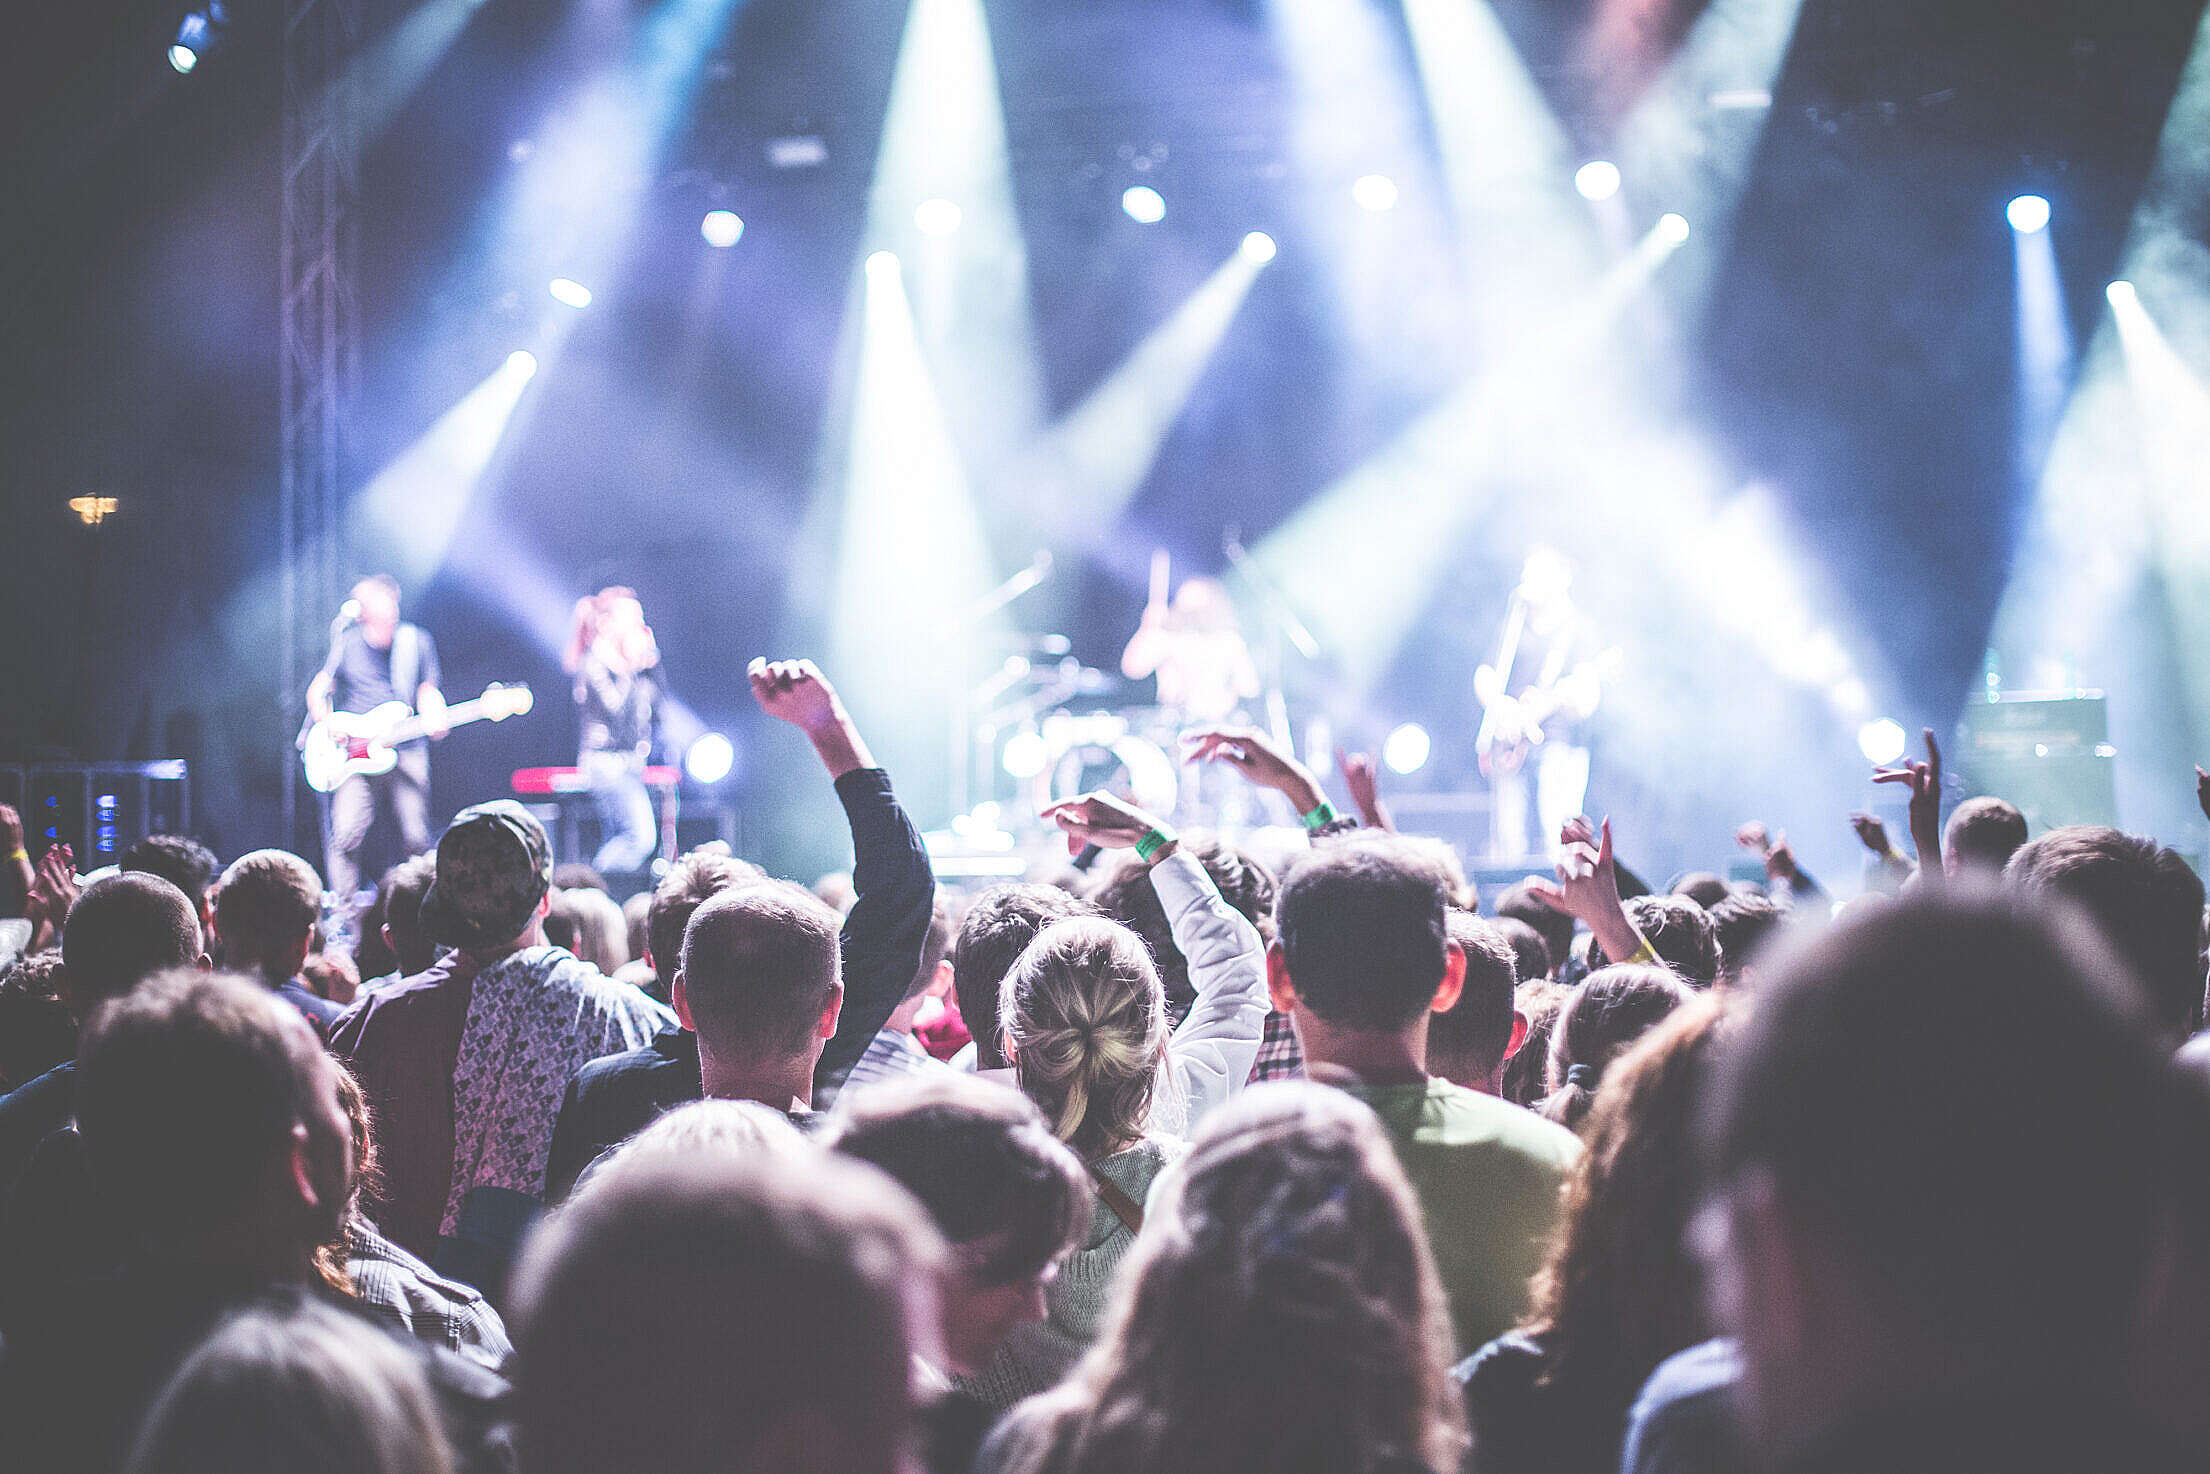 Crowds of People Partying at a Live Concert Free Stock Photo